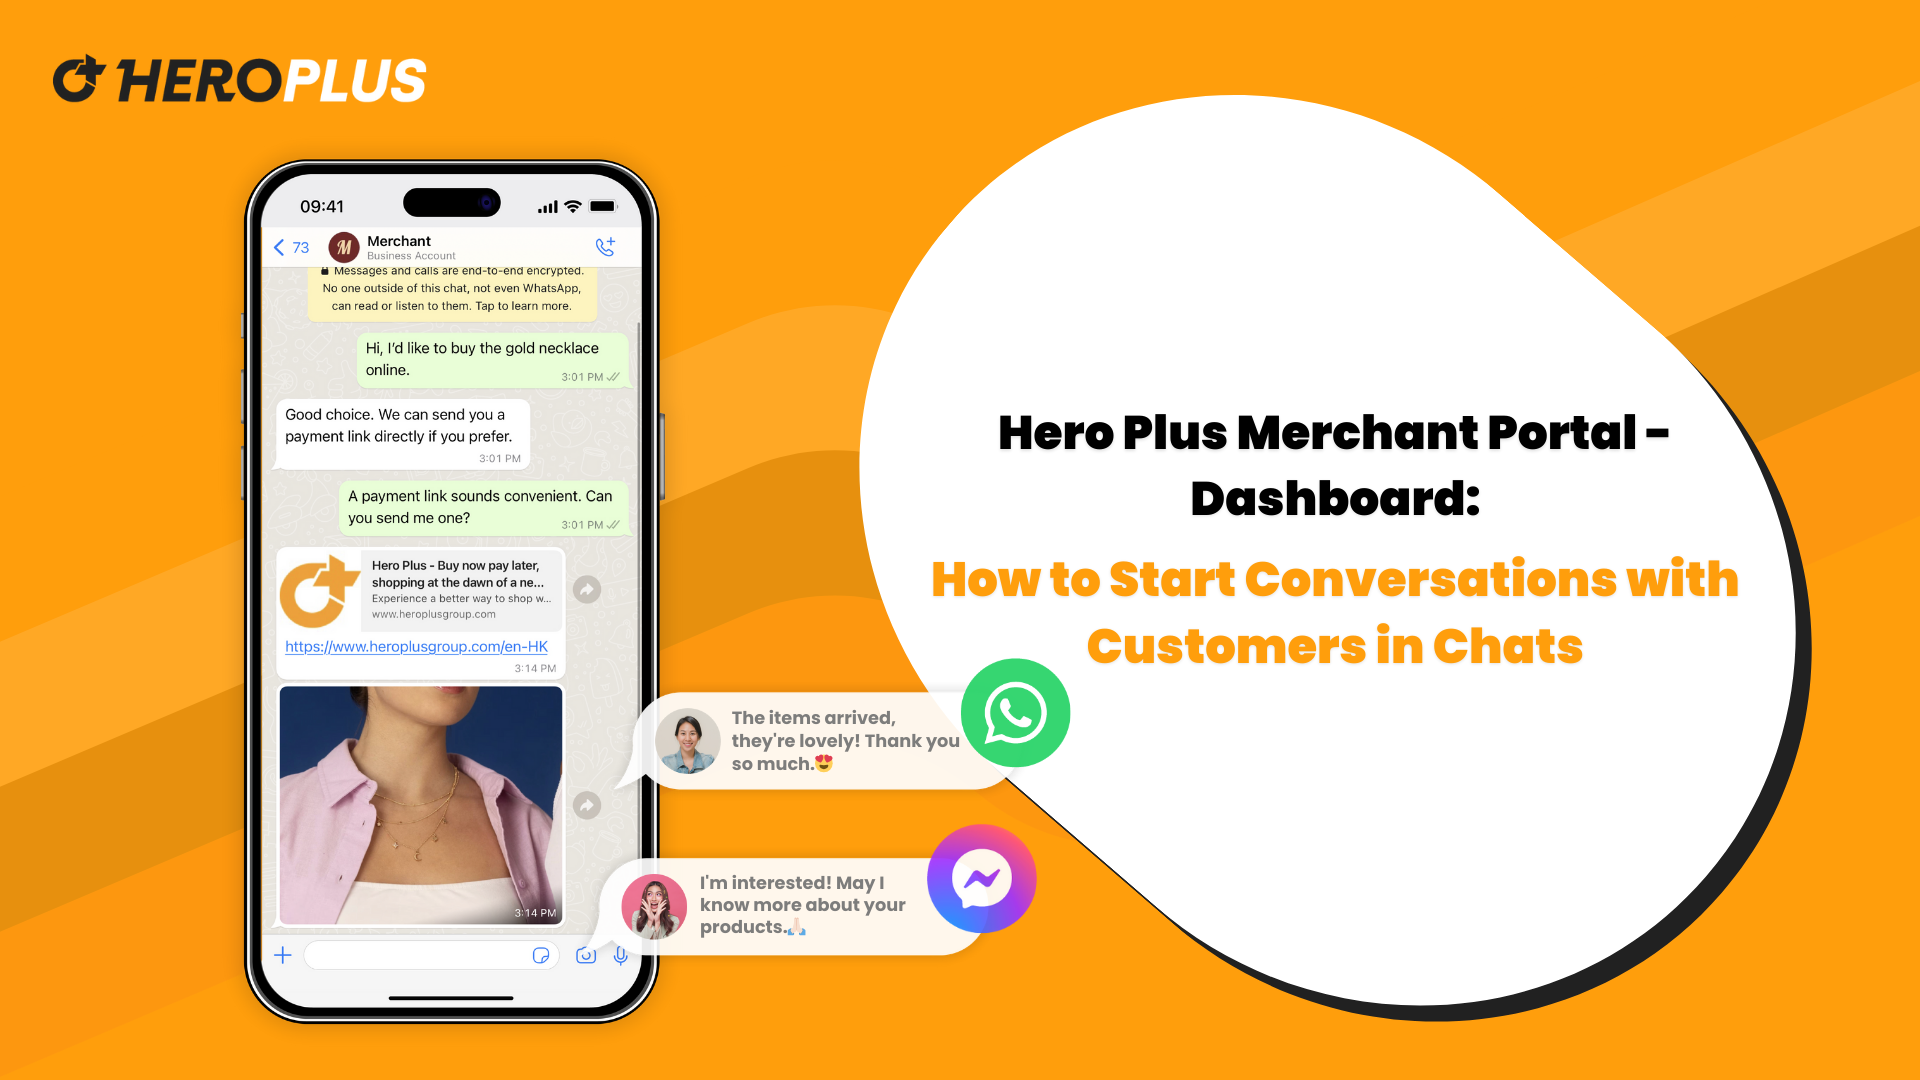 Hero Plus Merchant Portal - Dashboard: How to Start Conversations with Customers in Chats